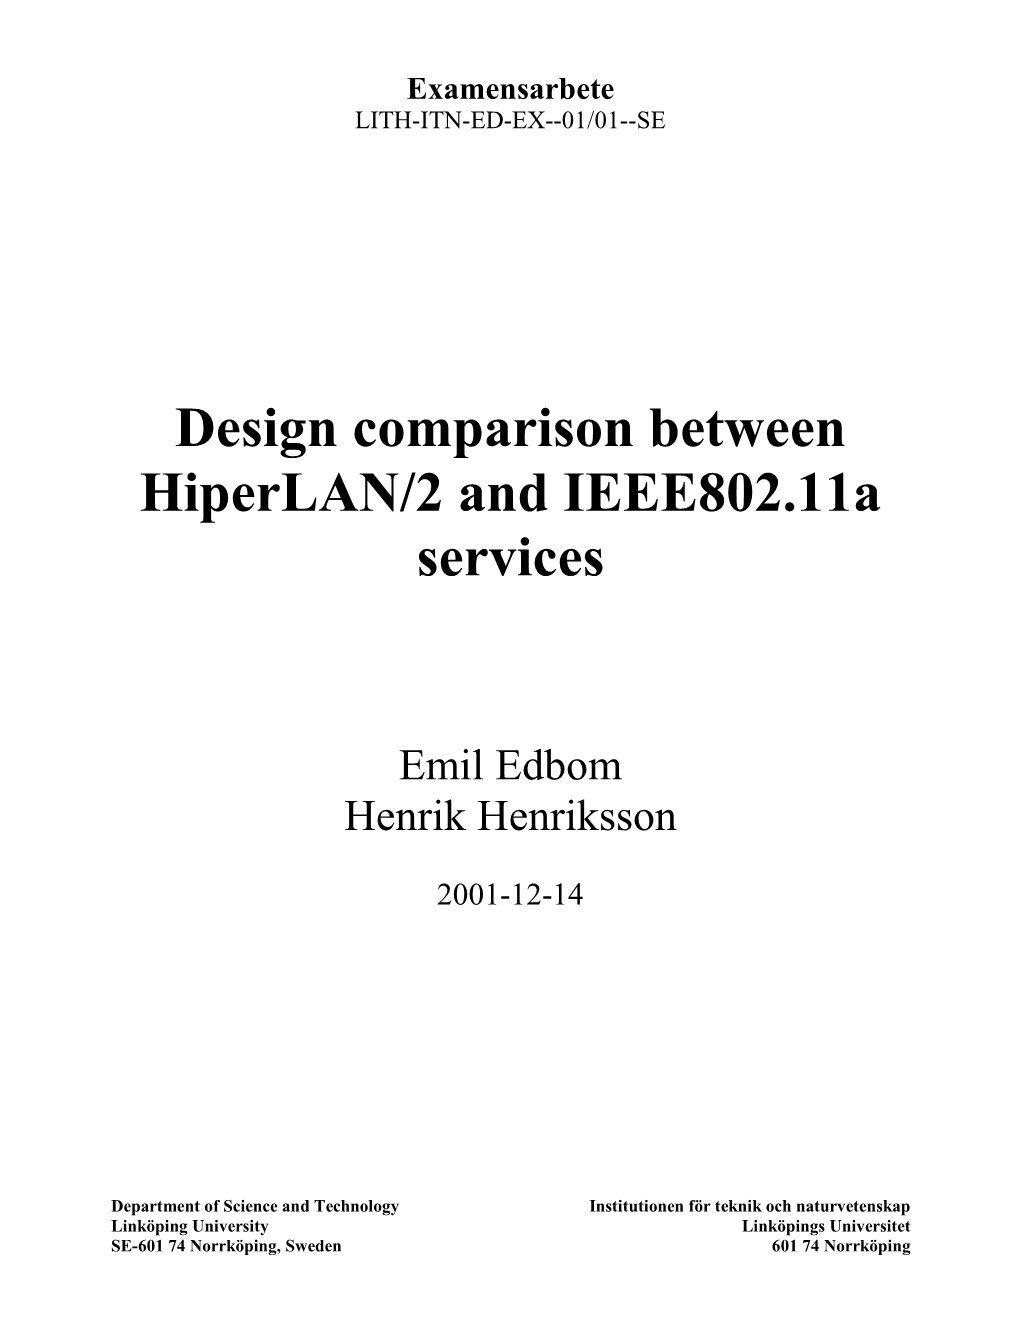 Design Comparison Between Hiperlan/2 and IEEE802.11A Services